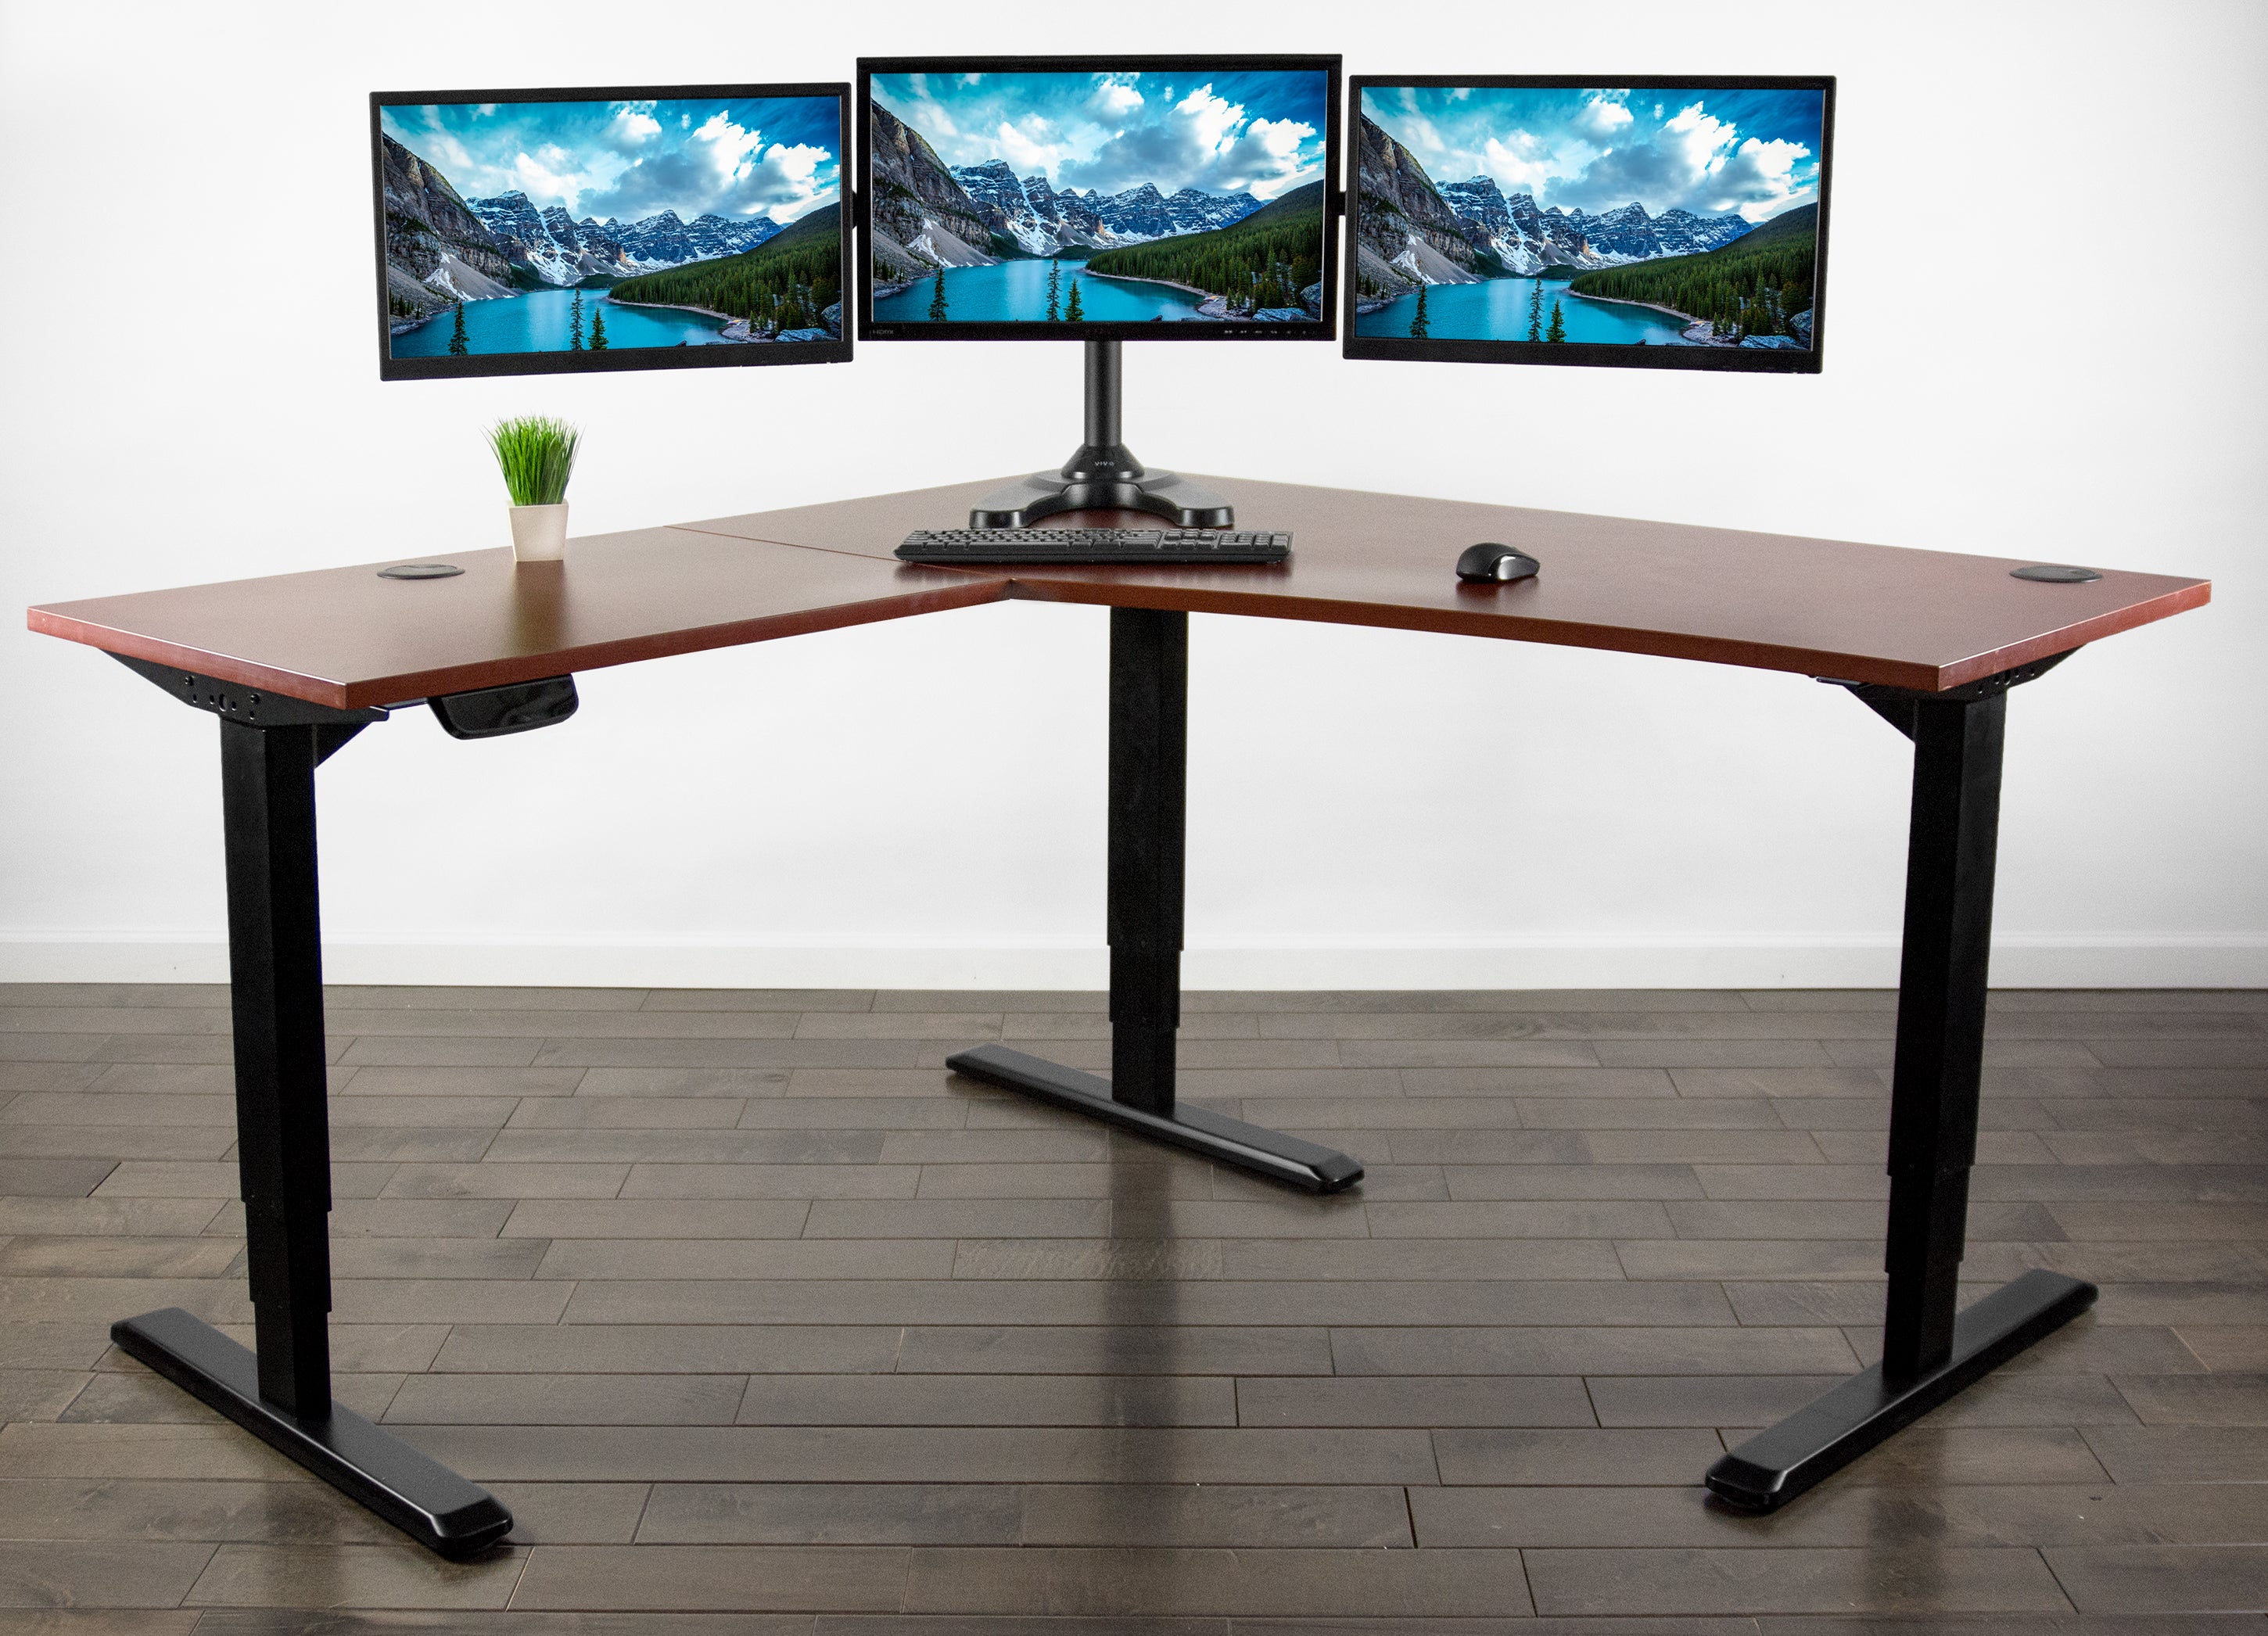 Choosing the Right Tabletop for Your Desk Frame